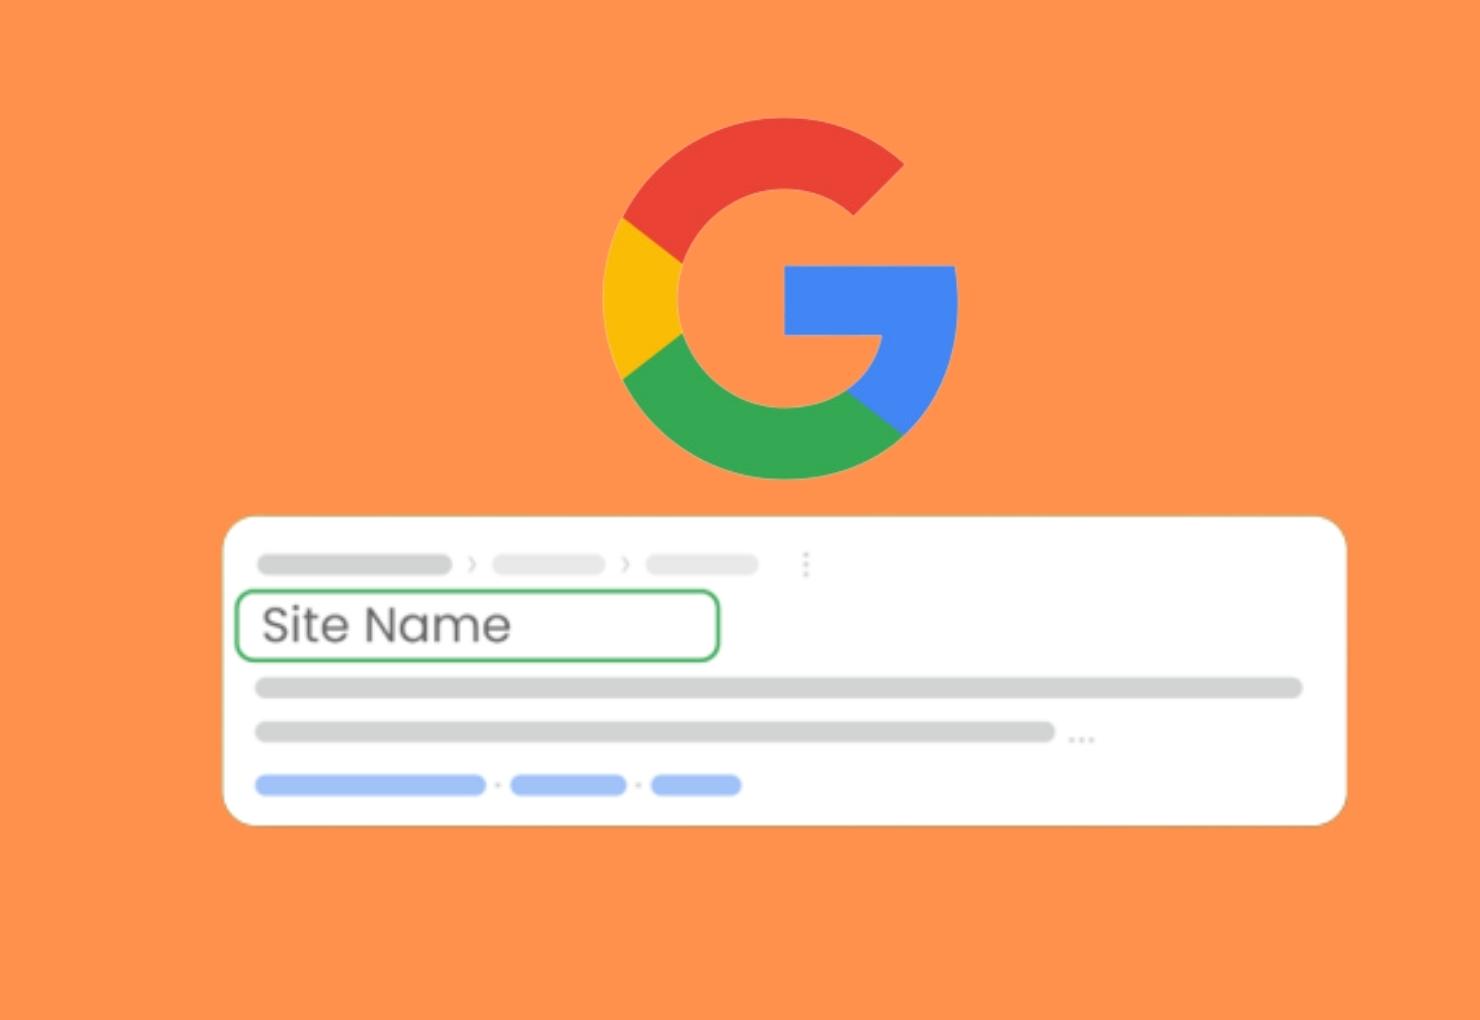 Title Tags Are Replaced with Site Names by Google for Homepage Results